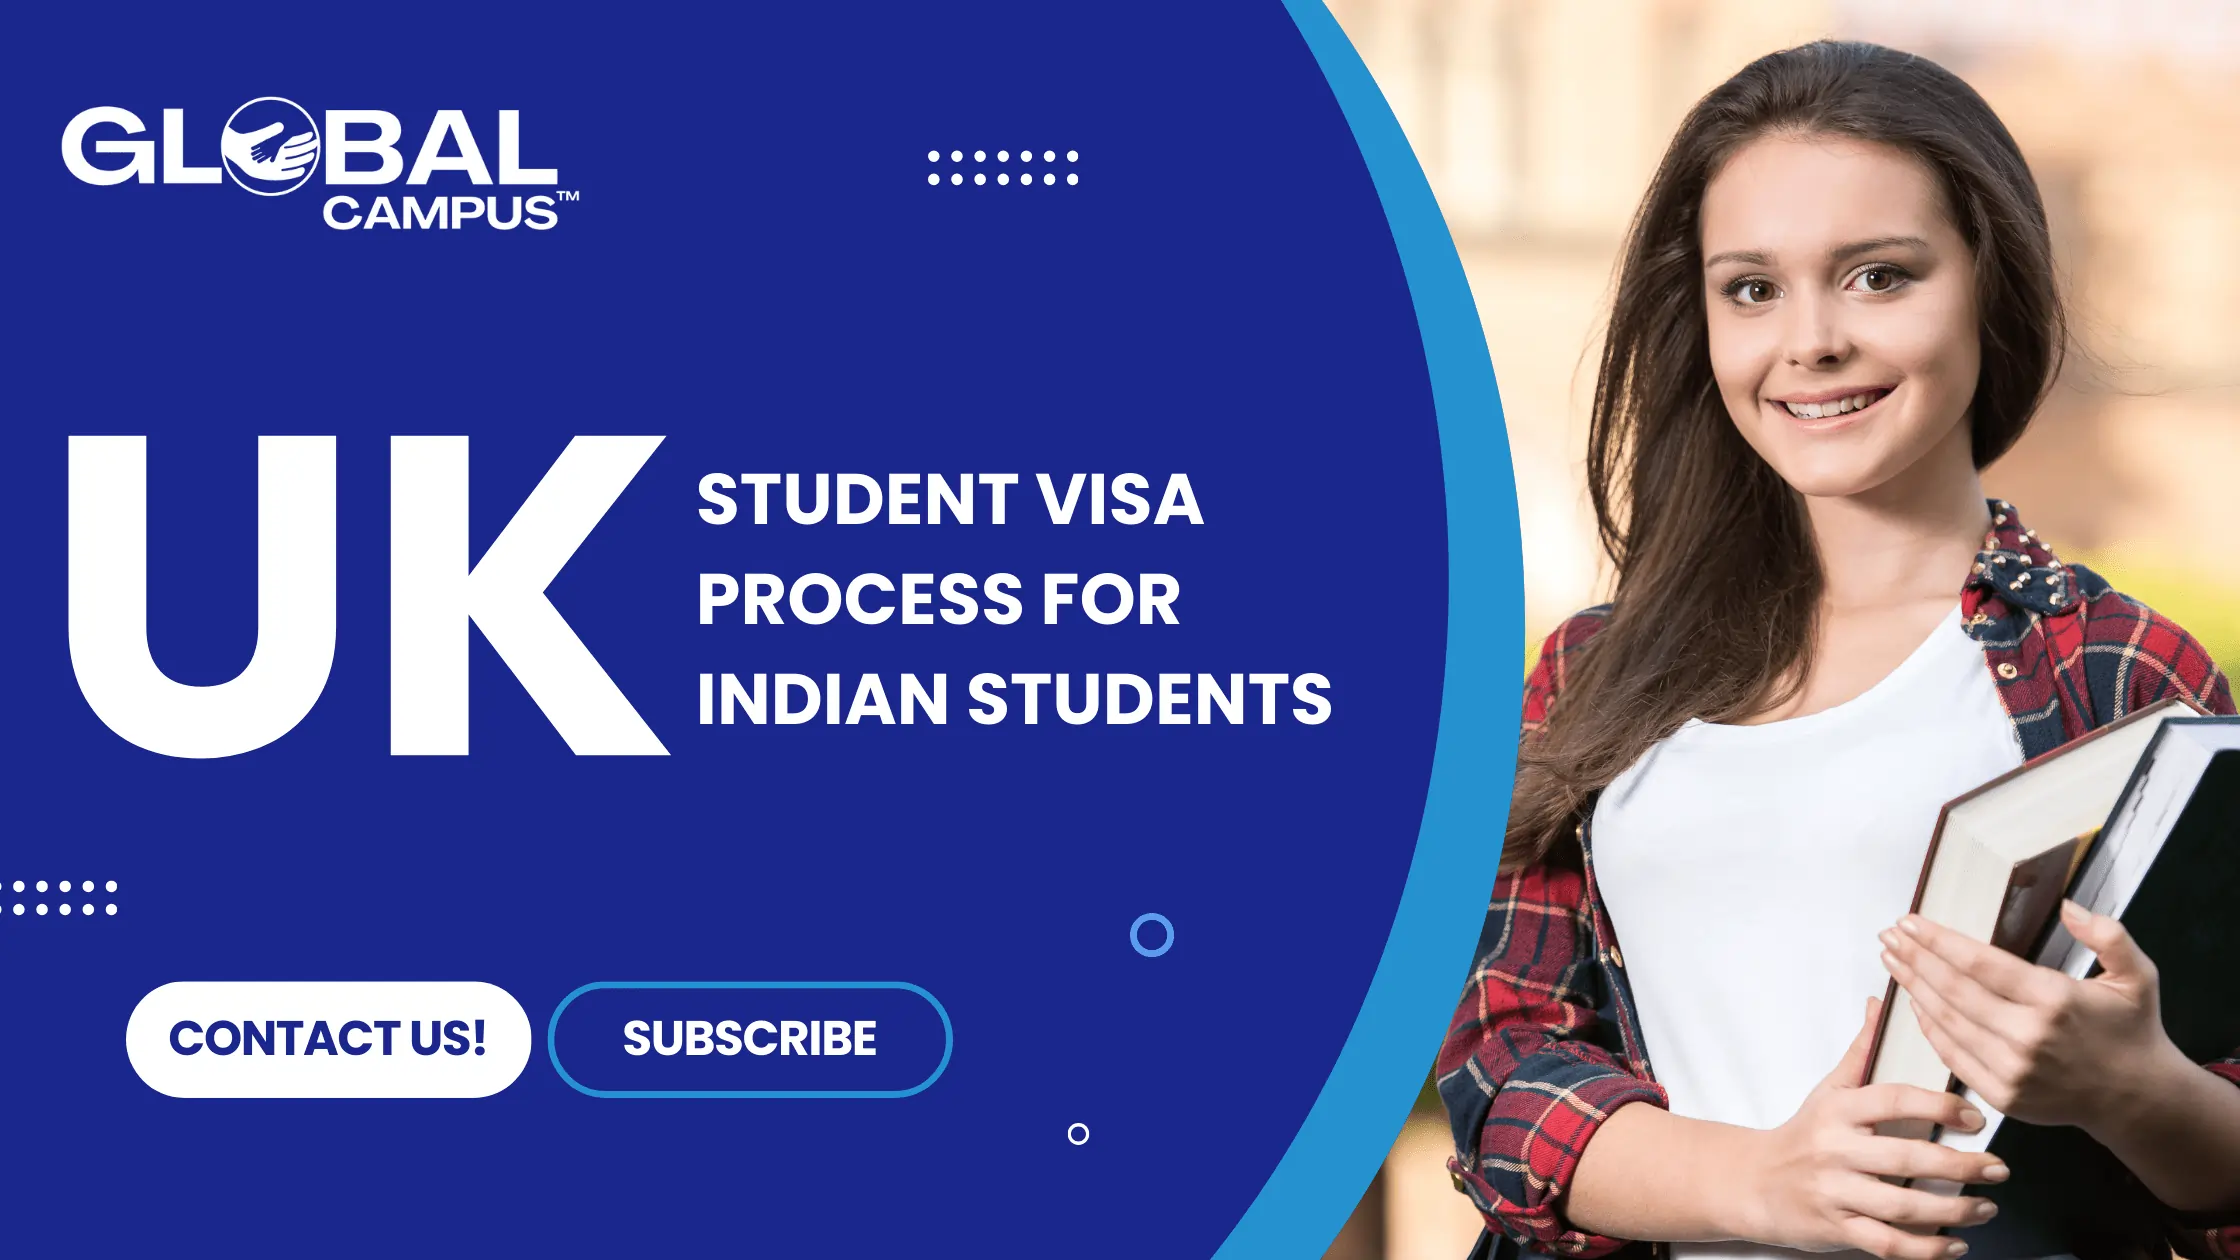 UK Student Visa Process for Indian students is being explained.